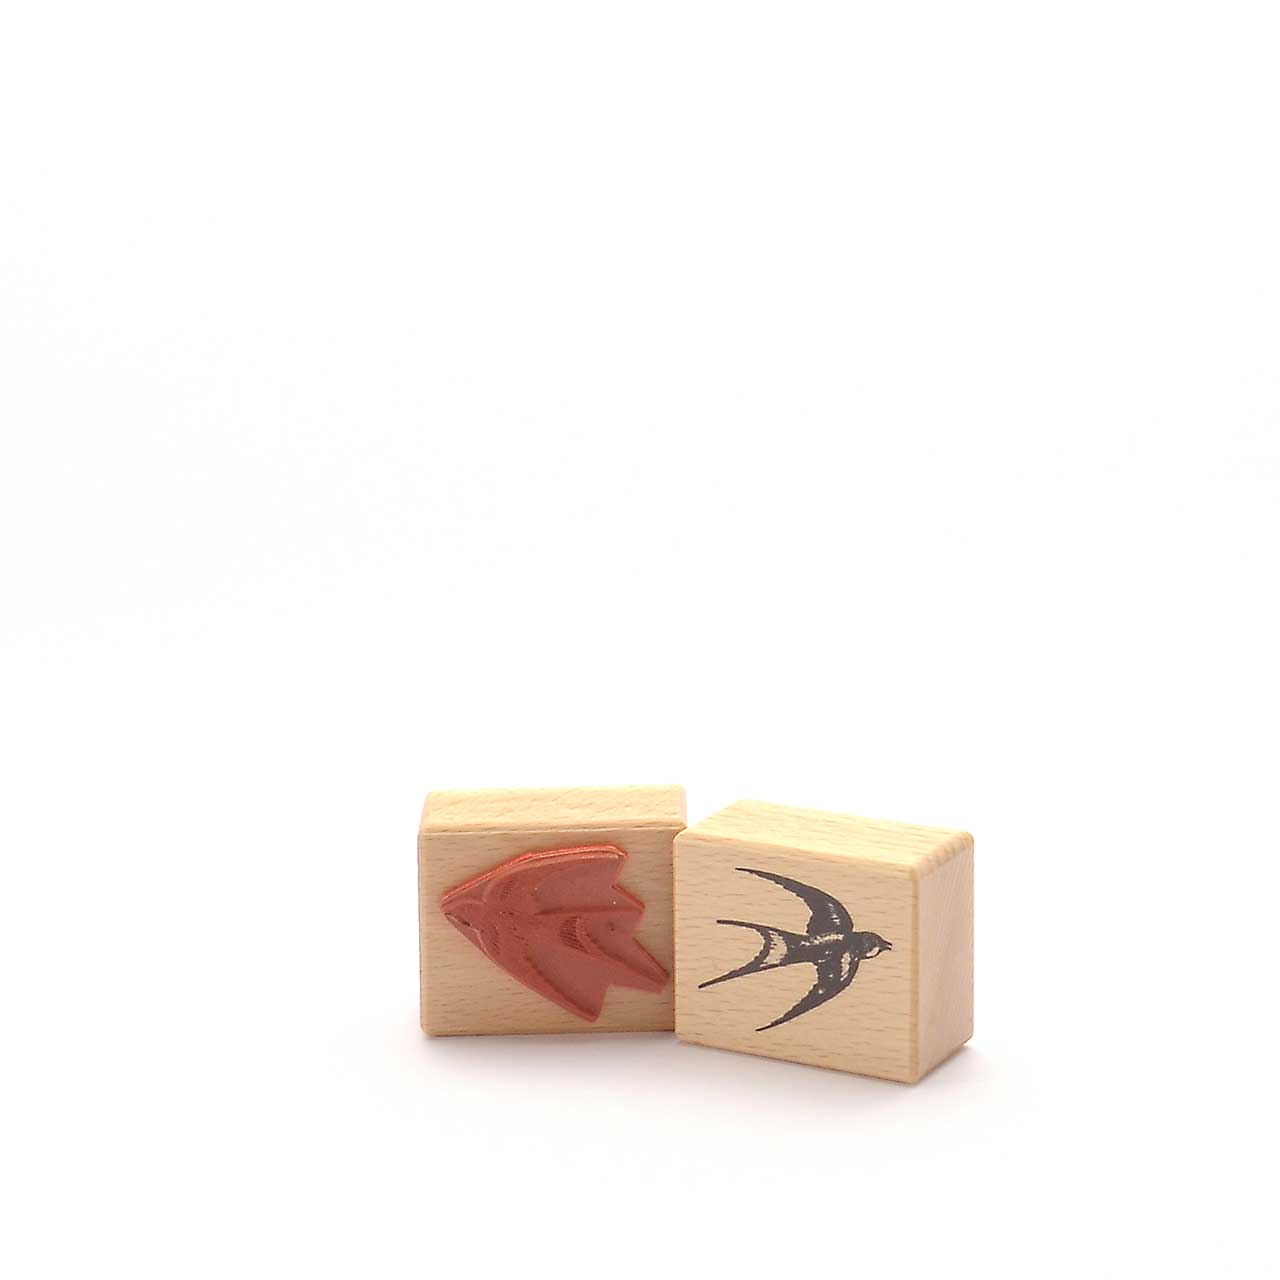 Swallow stamp